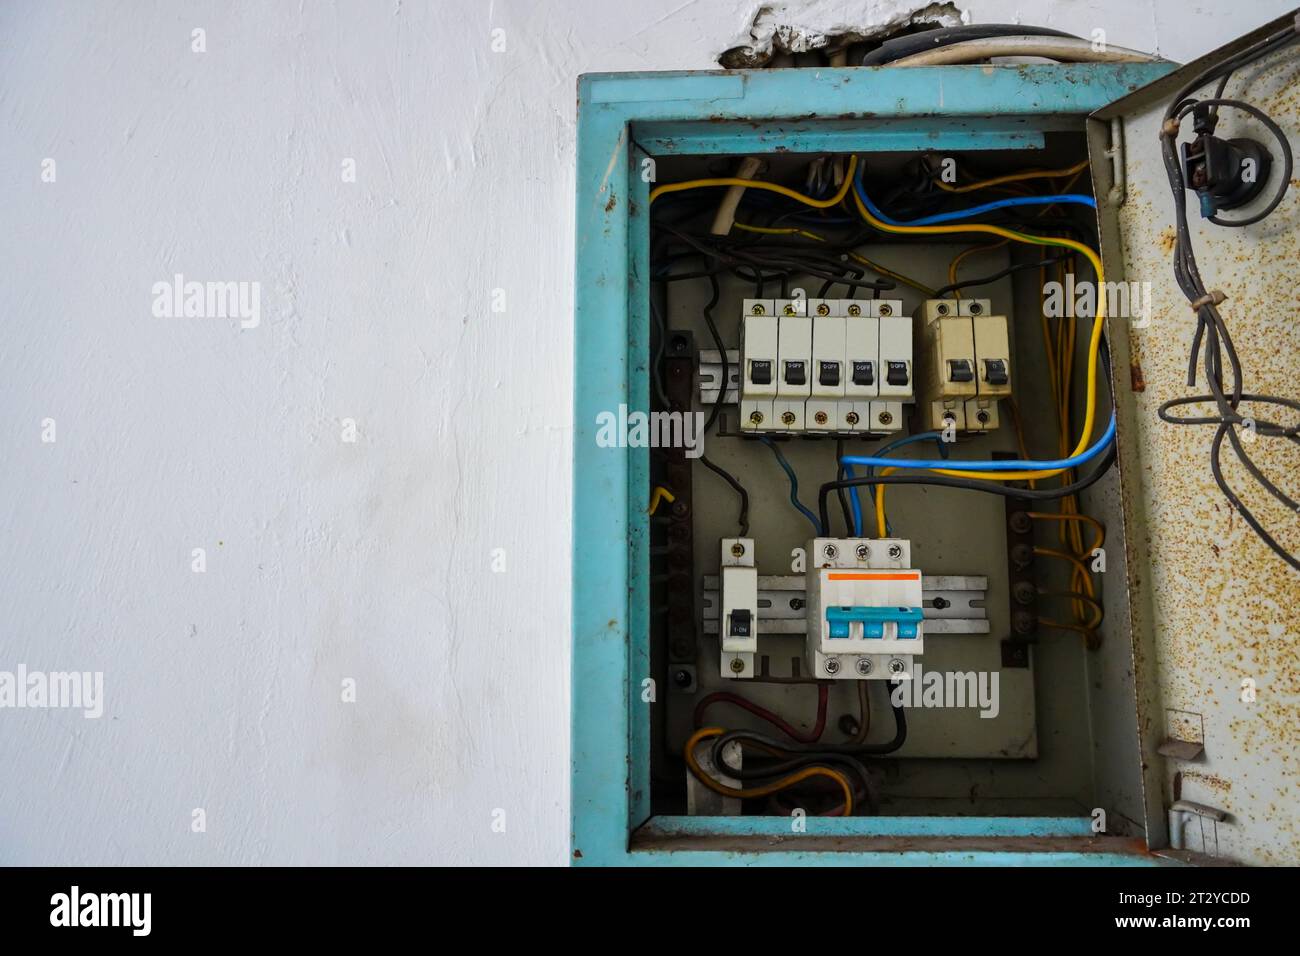 Circuit breaker panel. Electrical distribution for multiple rooms in a building, featuring a white wall background Stock Photo